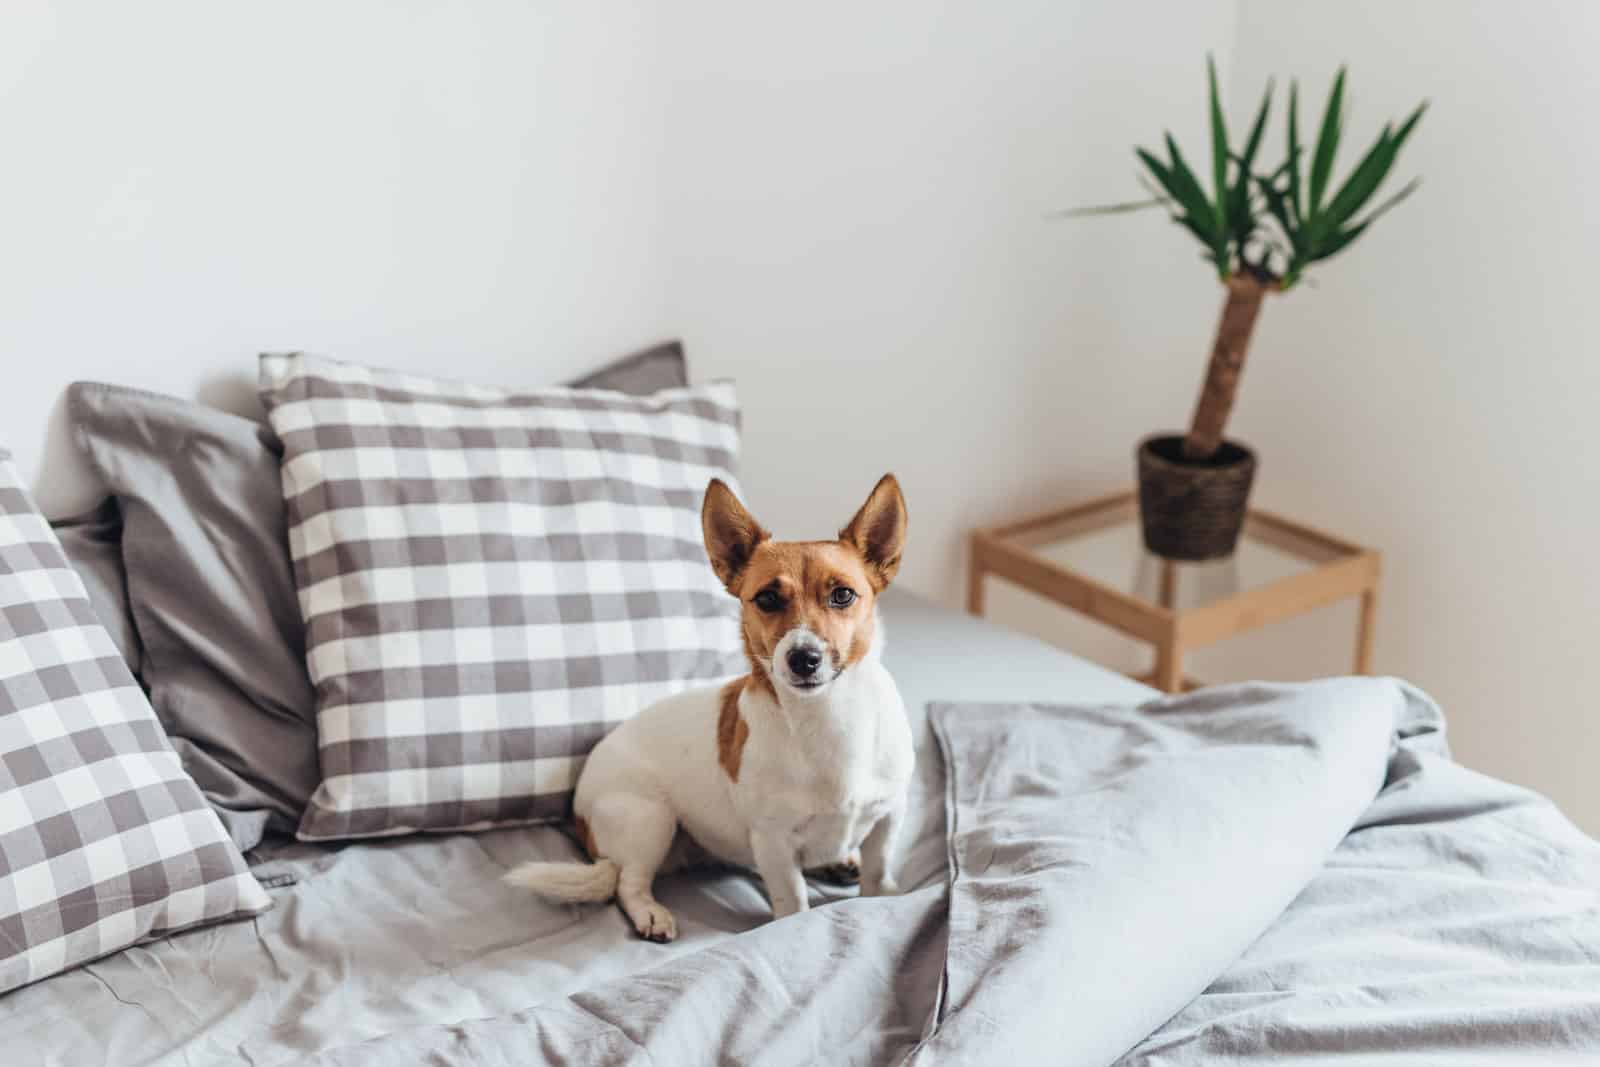 Which is the best food to feed your dog  - Adorable dog in bed